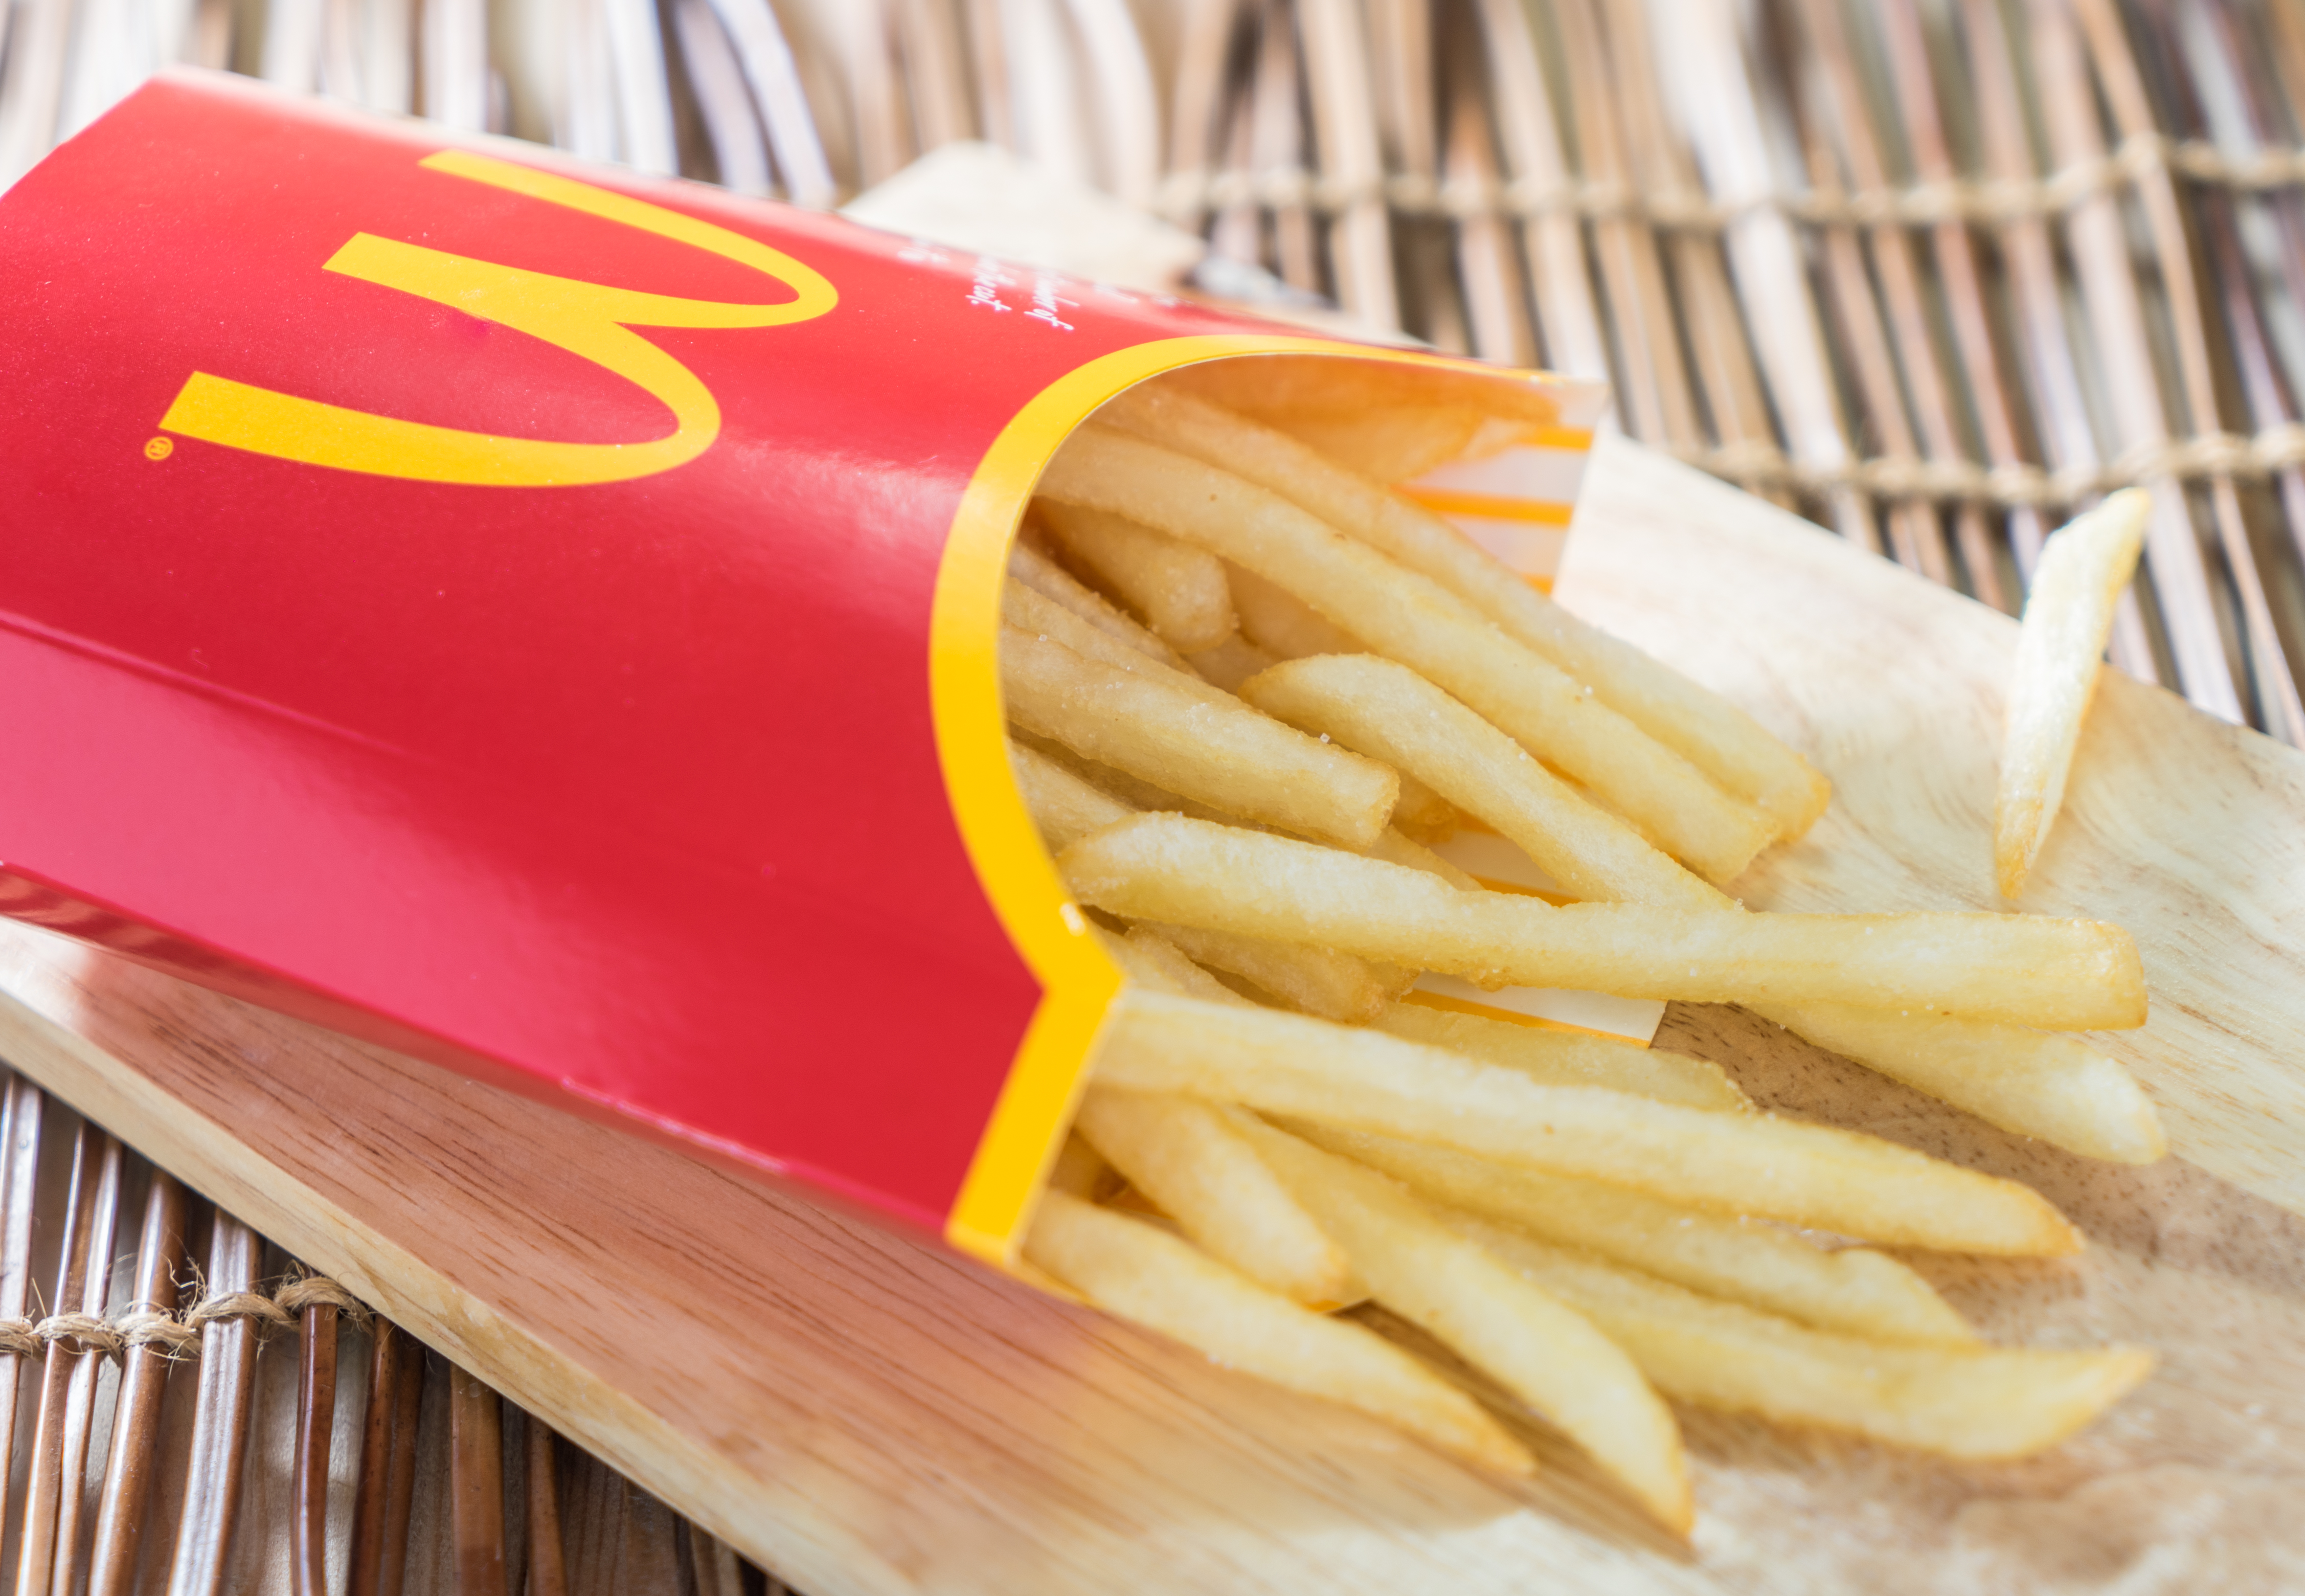 A box of Mc Donalds French Fries on a wooden tray.